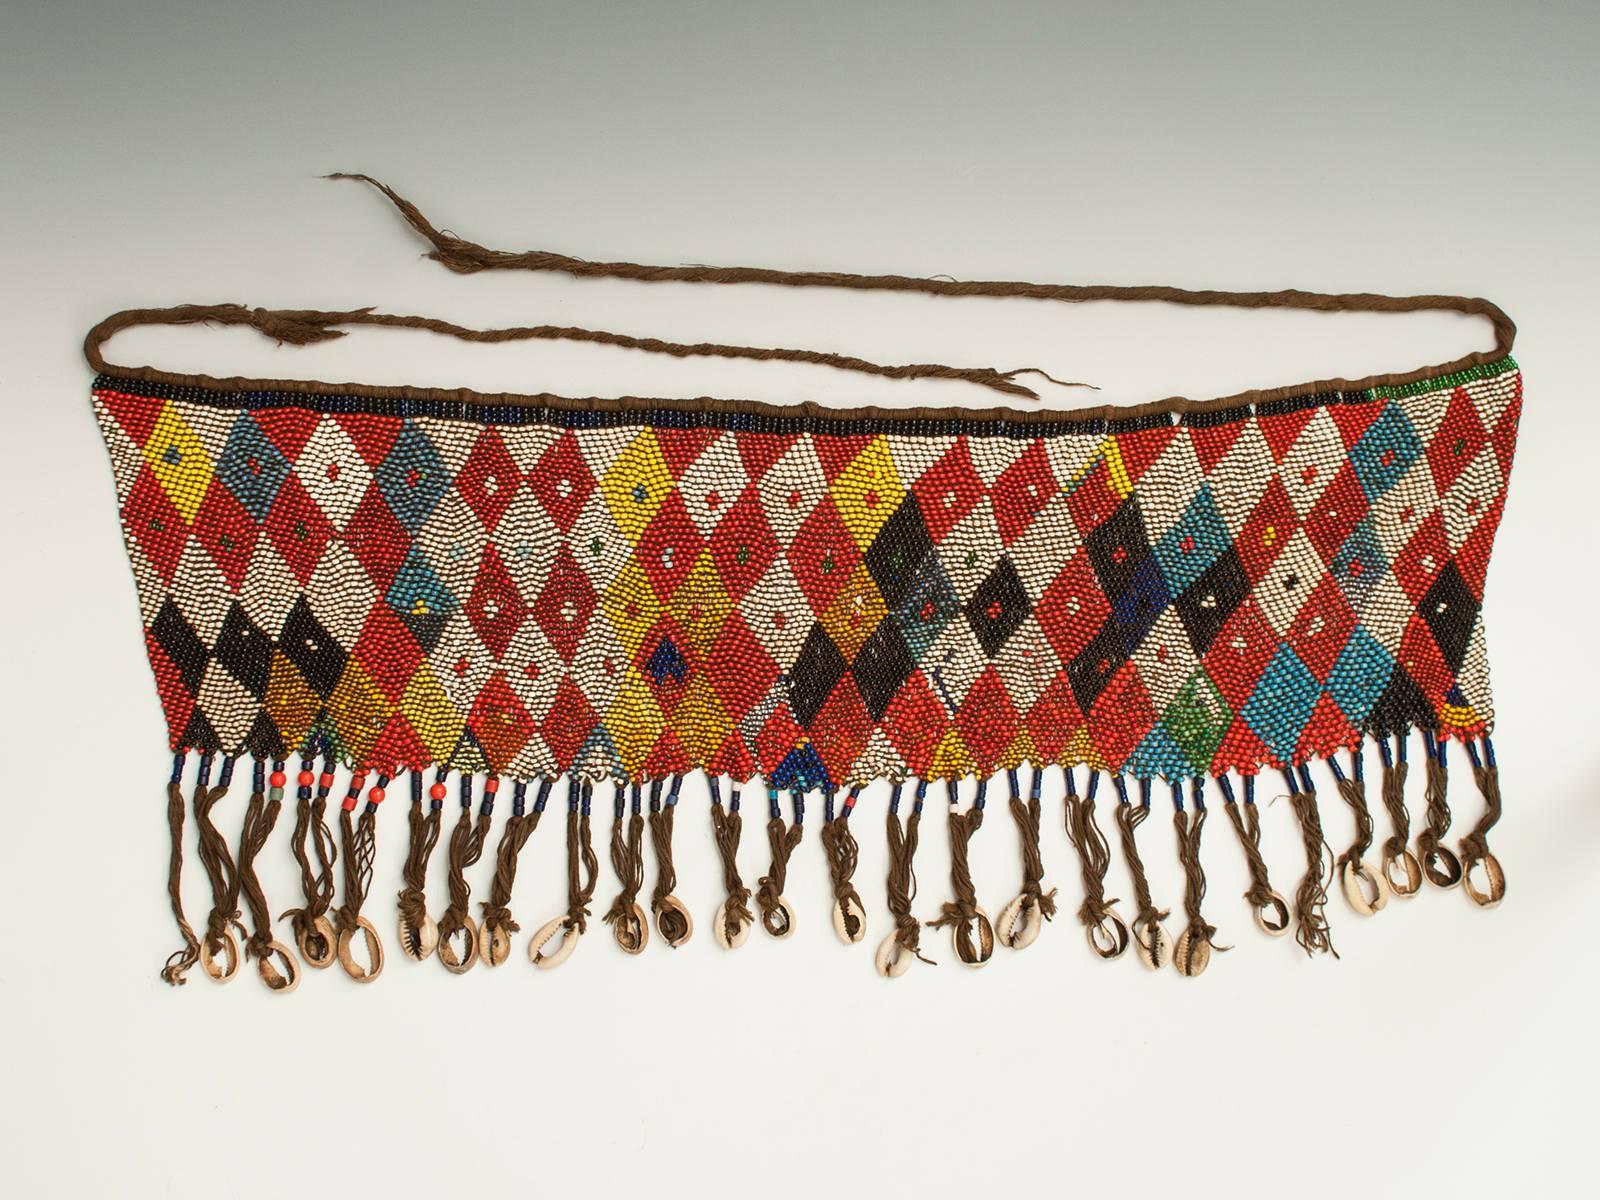 Offered by Zena Kruzick
Early to mid-20th century tribal glass-beaded modesty apron cache-sexe, Bana Guili people, Mandara Mountains, Cameroon

A colorful example of the modesty aprons worn by married women to special ceremonial occasions.